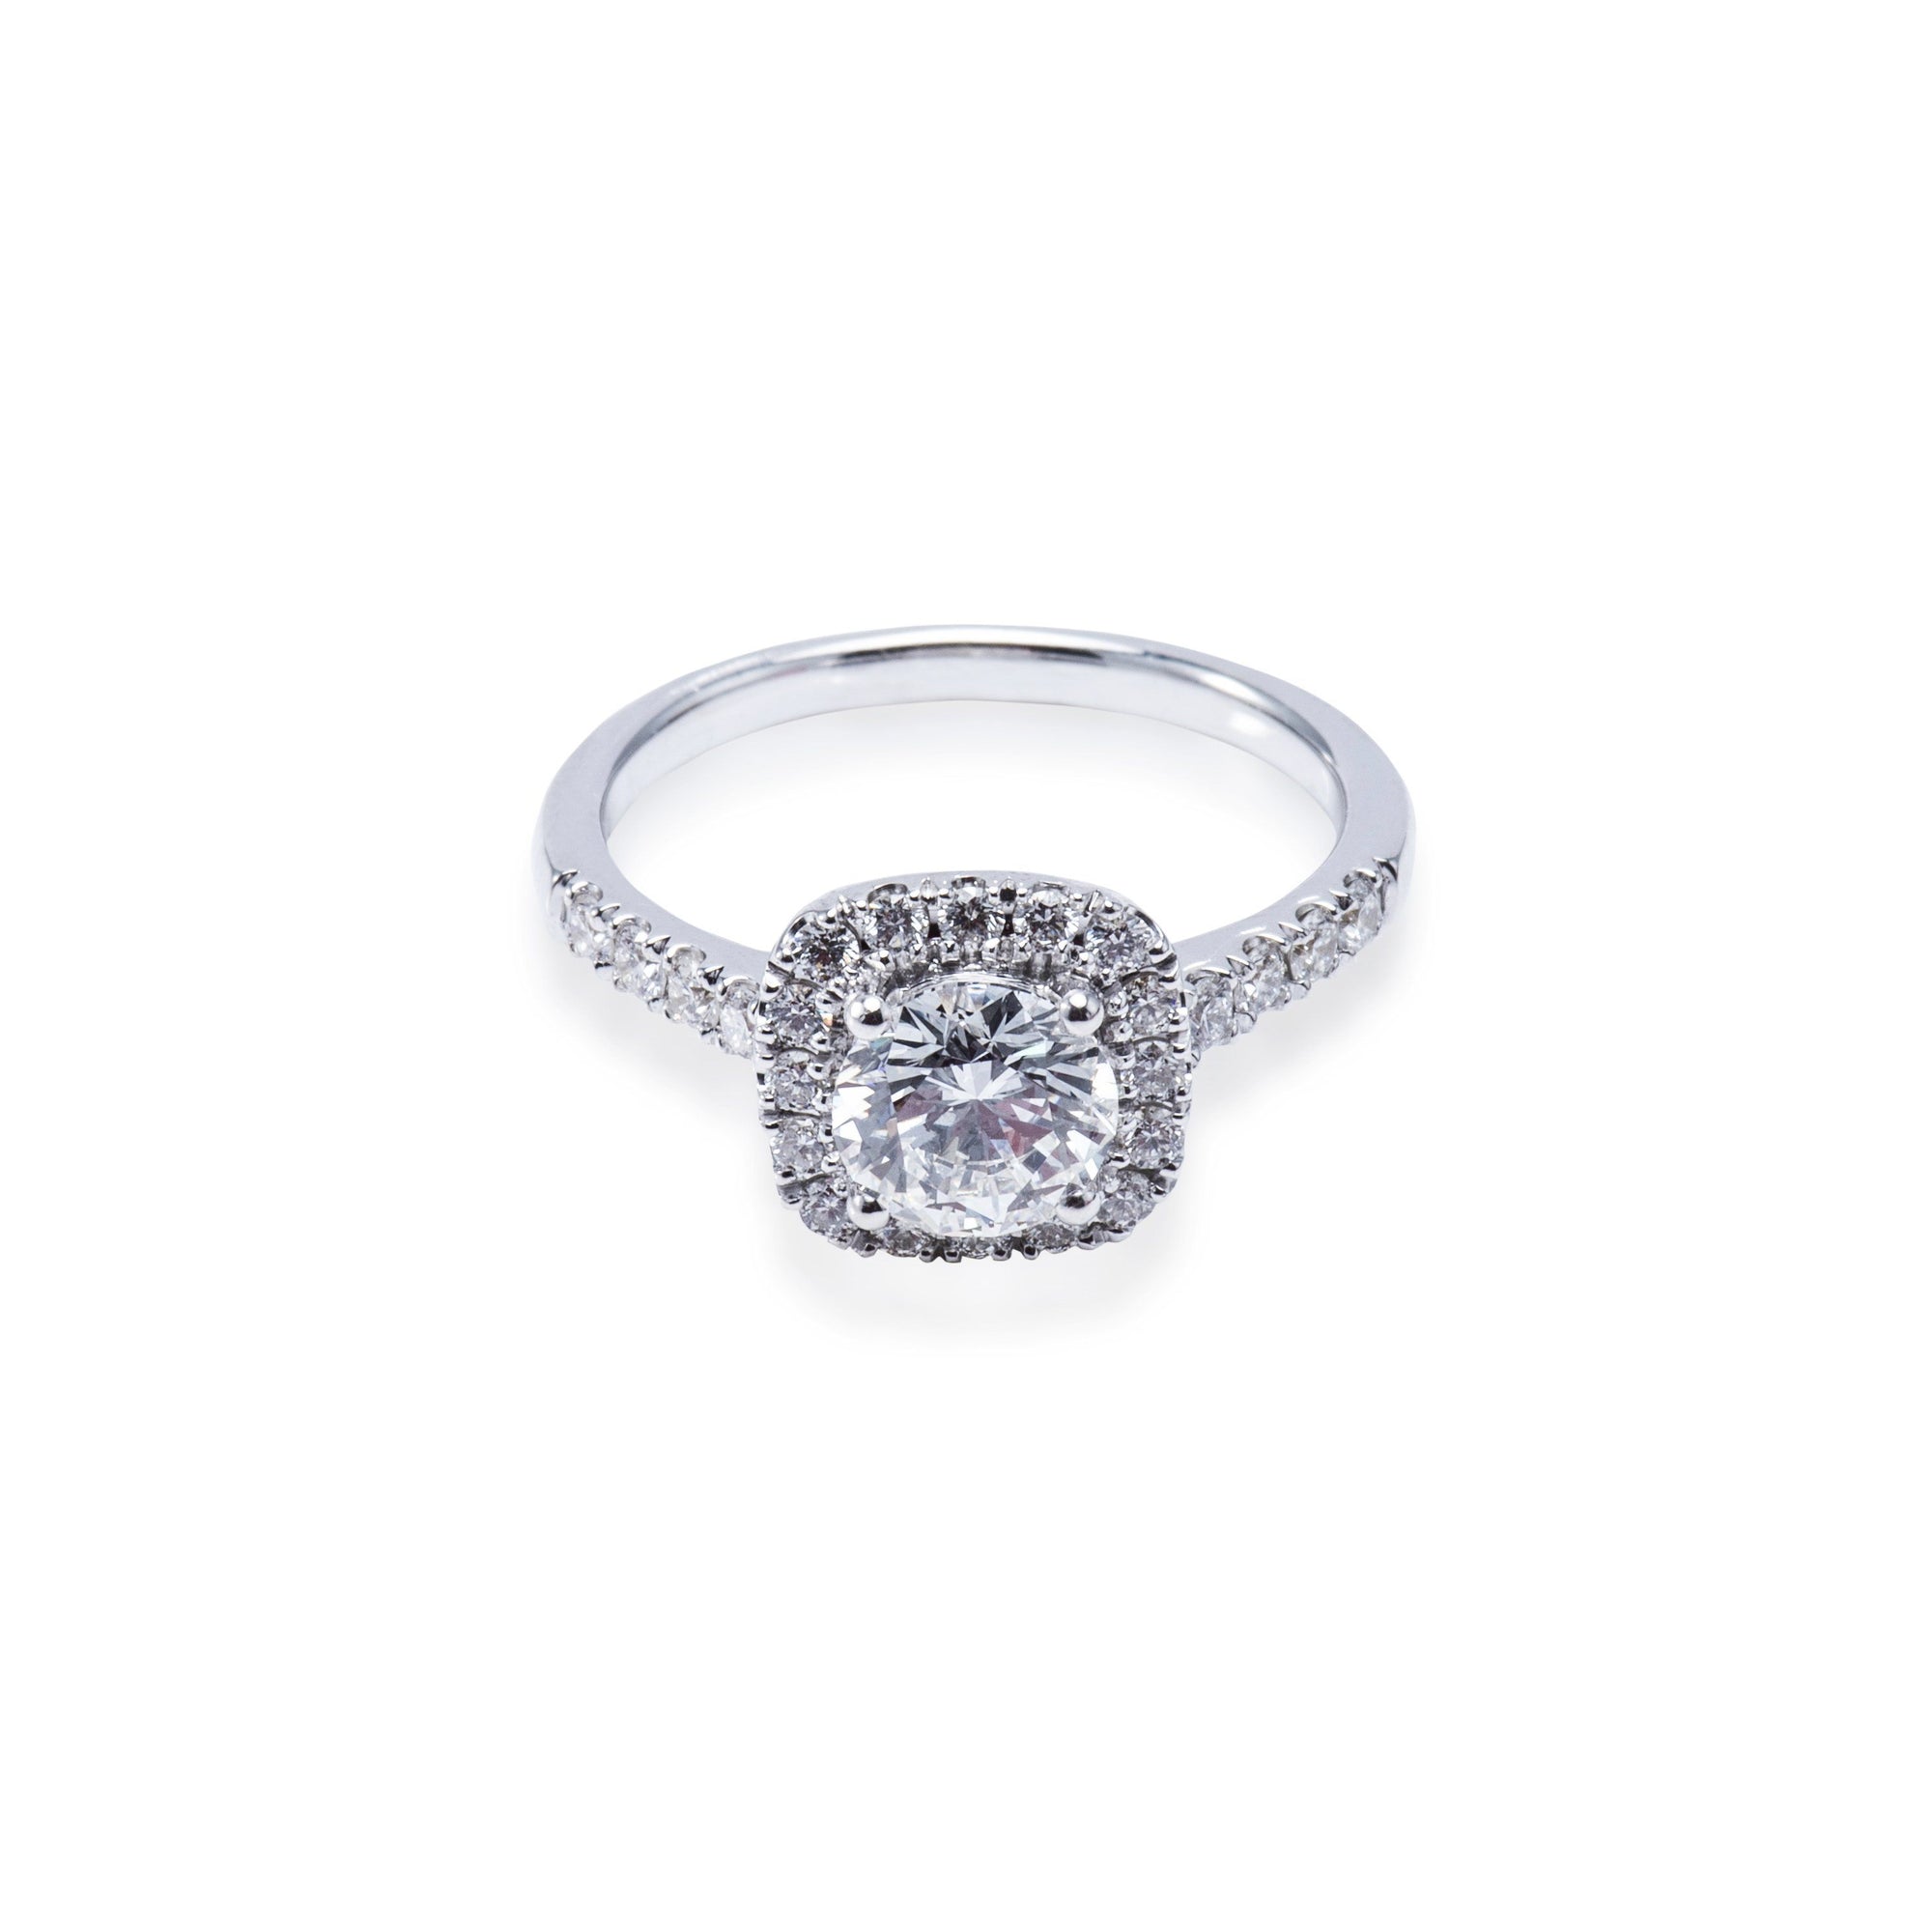 18CT WHITE GOLD DIAMOND HALO STYLE DIAMOND ENGAGEMENT RING Aces Jewellers 